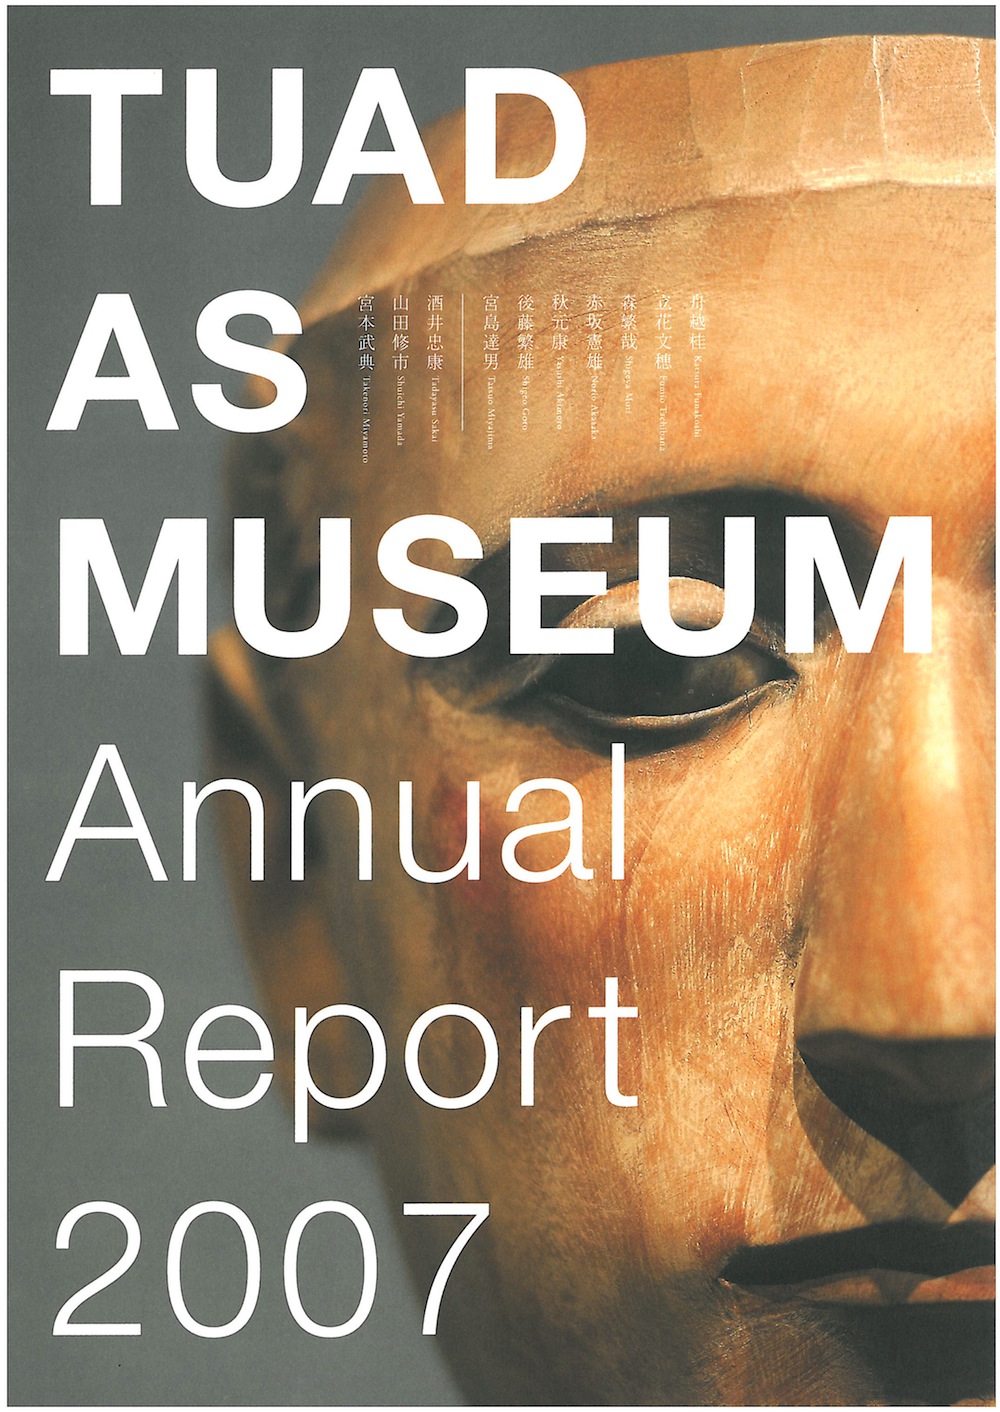 TUAD AS MUSEUM : Annual Report 2007